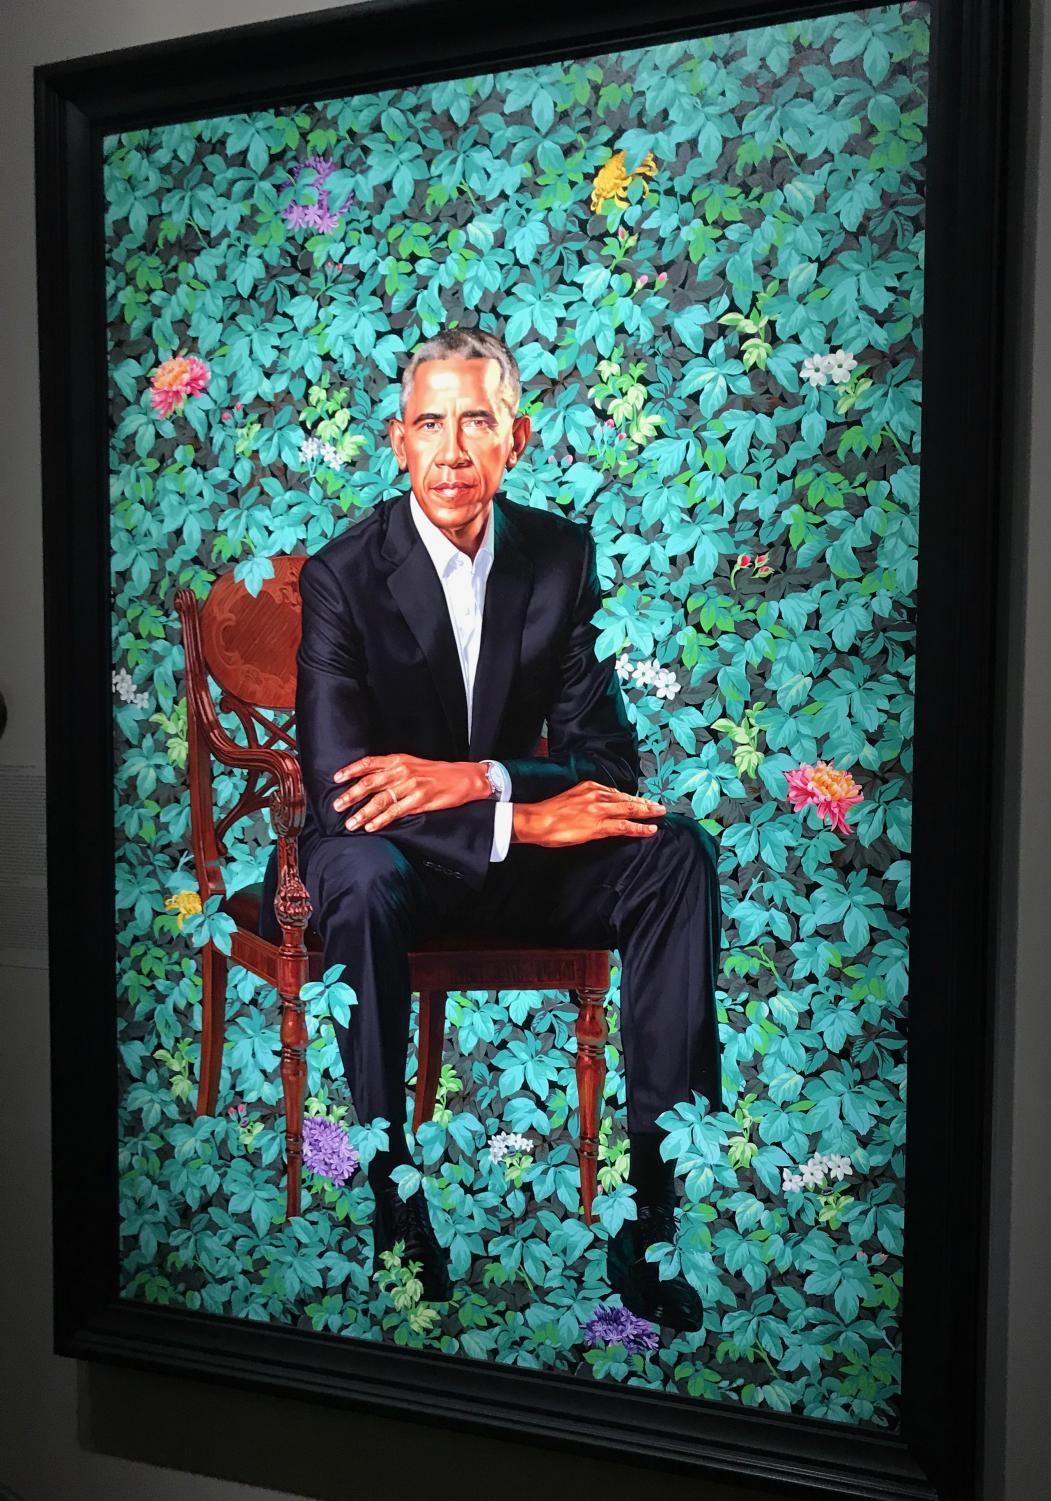 The National Portrait Gallery unveiled the latest paintings in the Presidential Portraits collection: the official portraits of President Barack Obama and First Lady Michelle Obama.